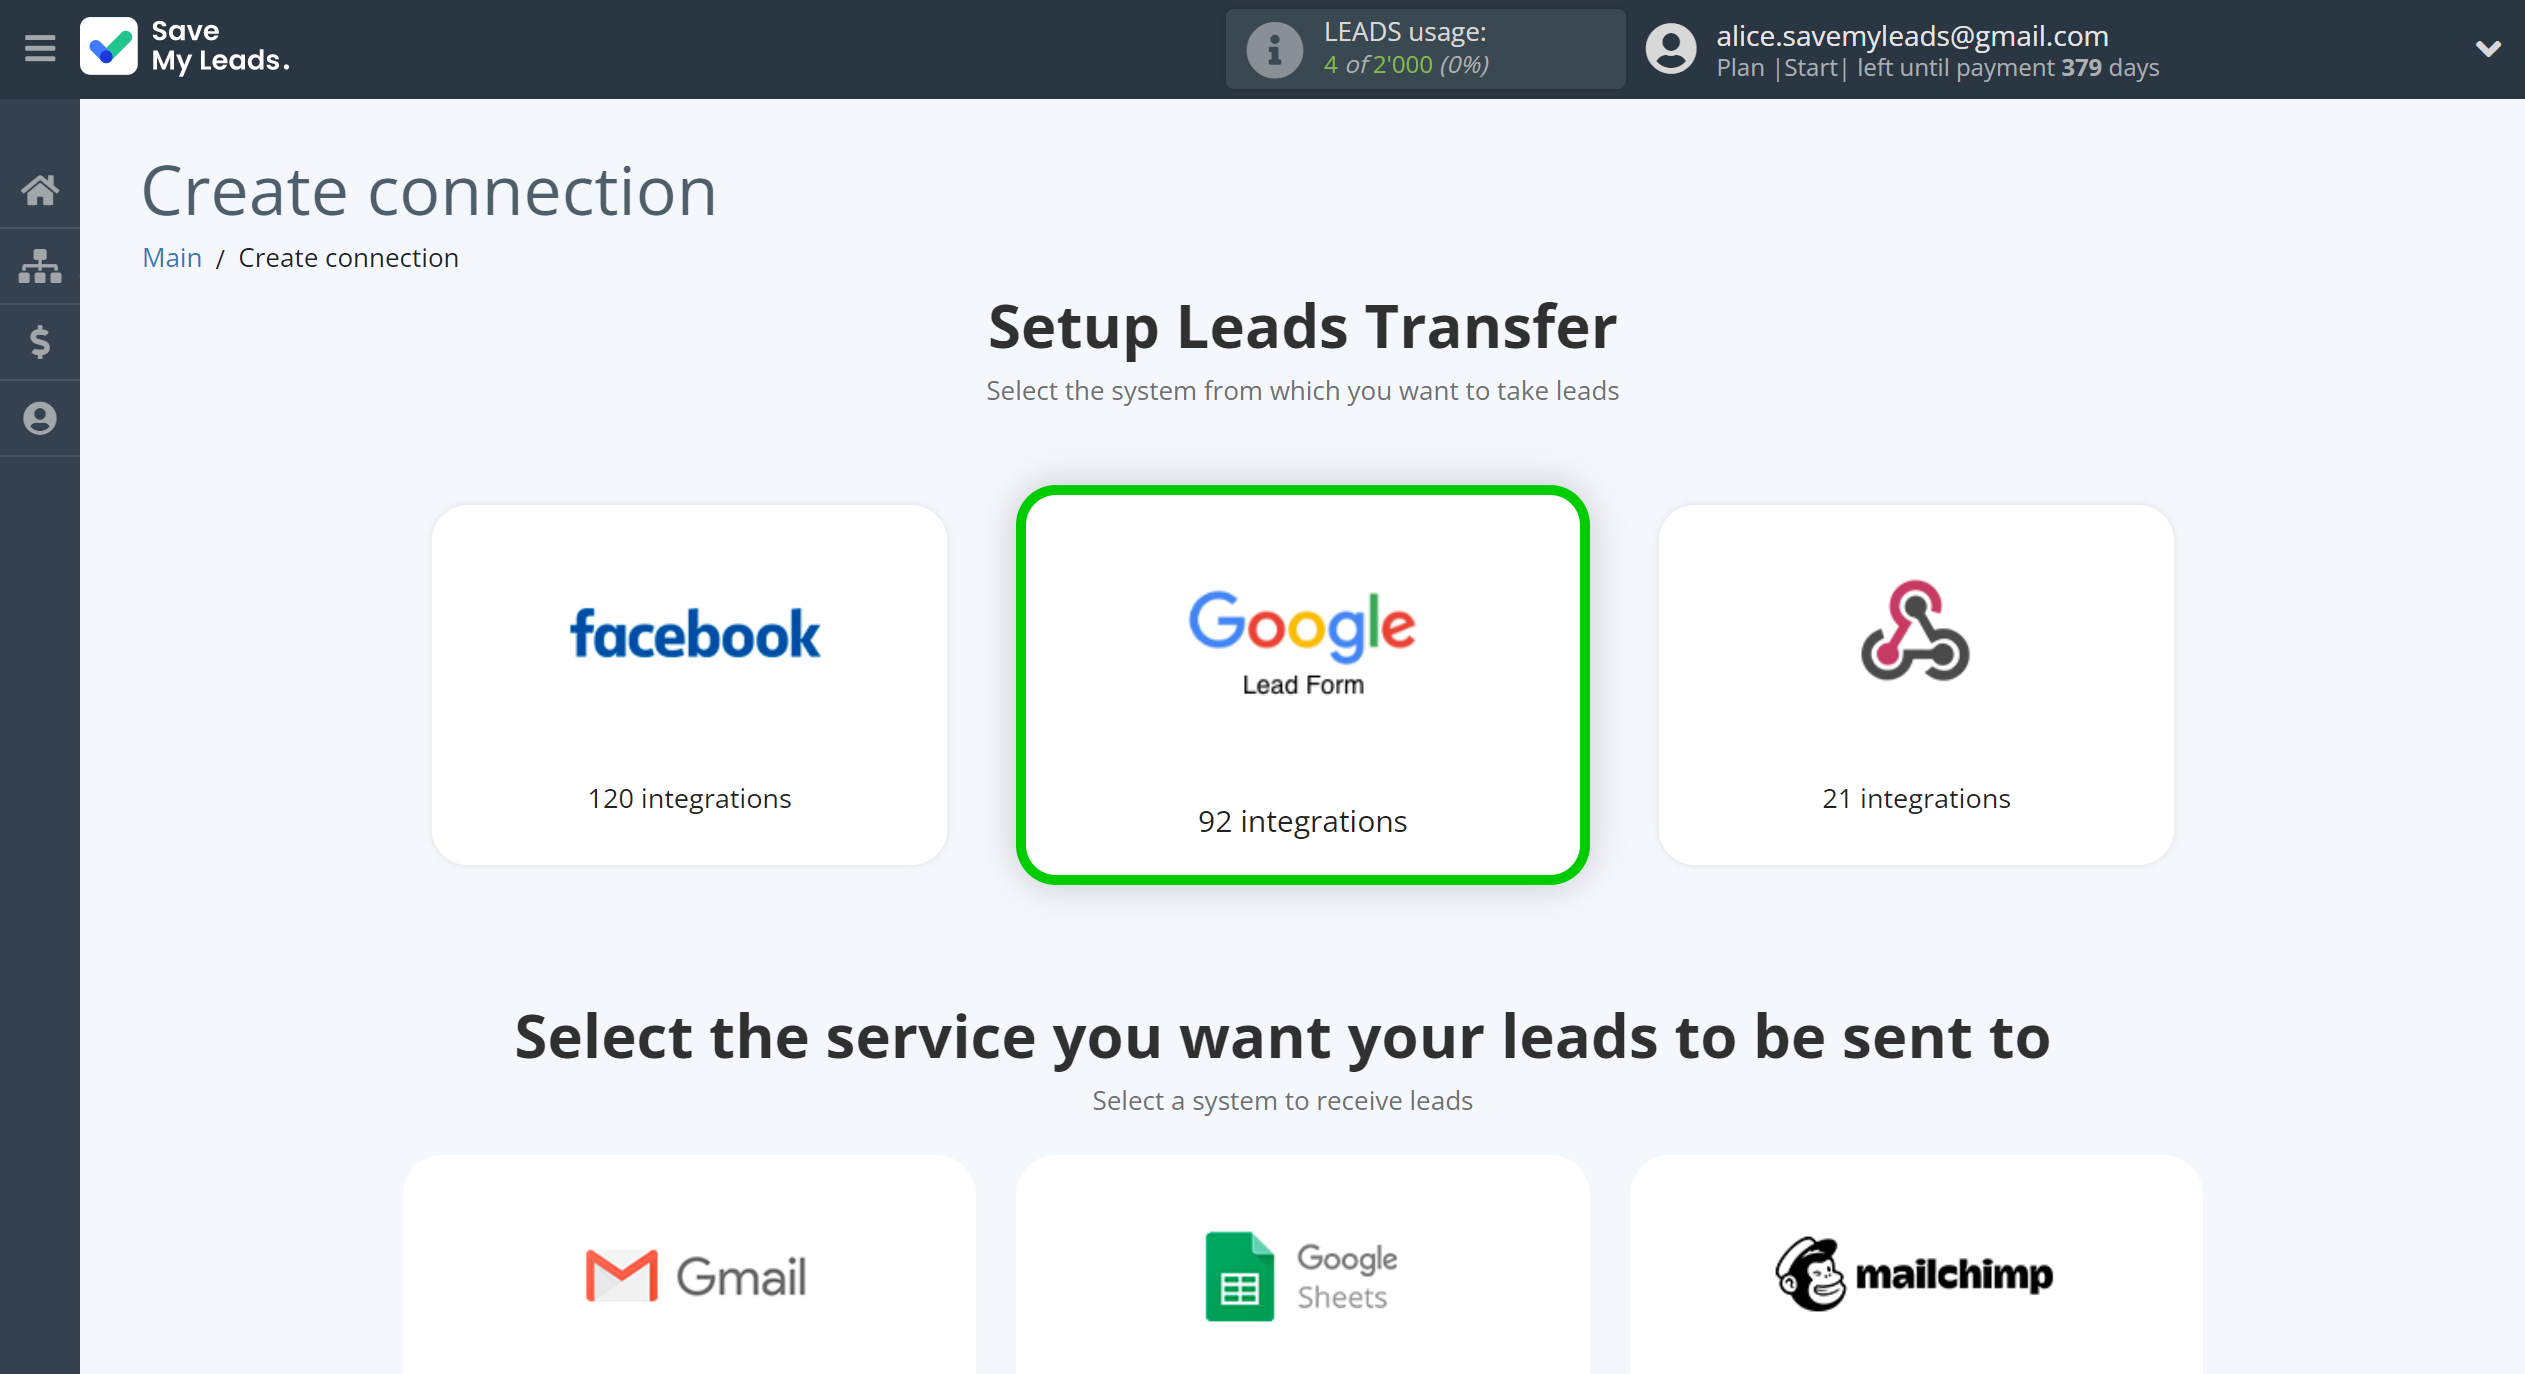 How to Connect Google Lead Form with eSputnik Send SMS | Data Source system selection